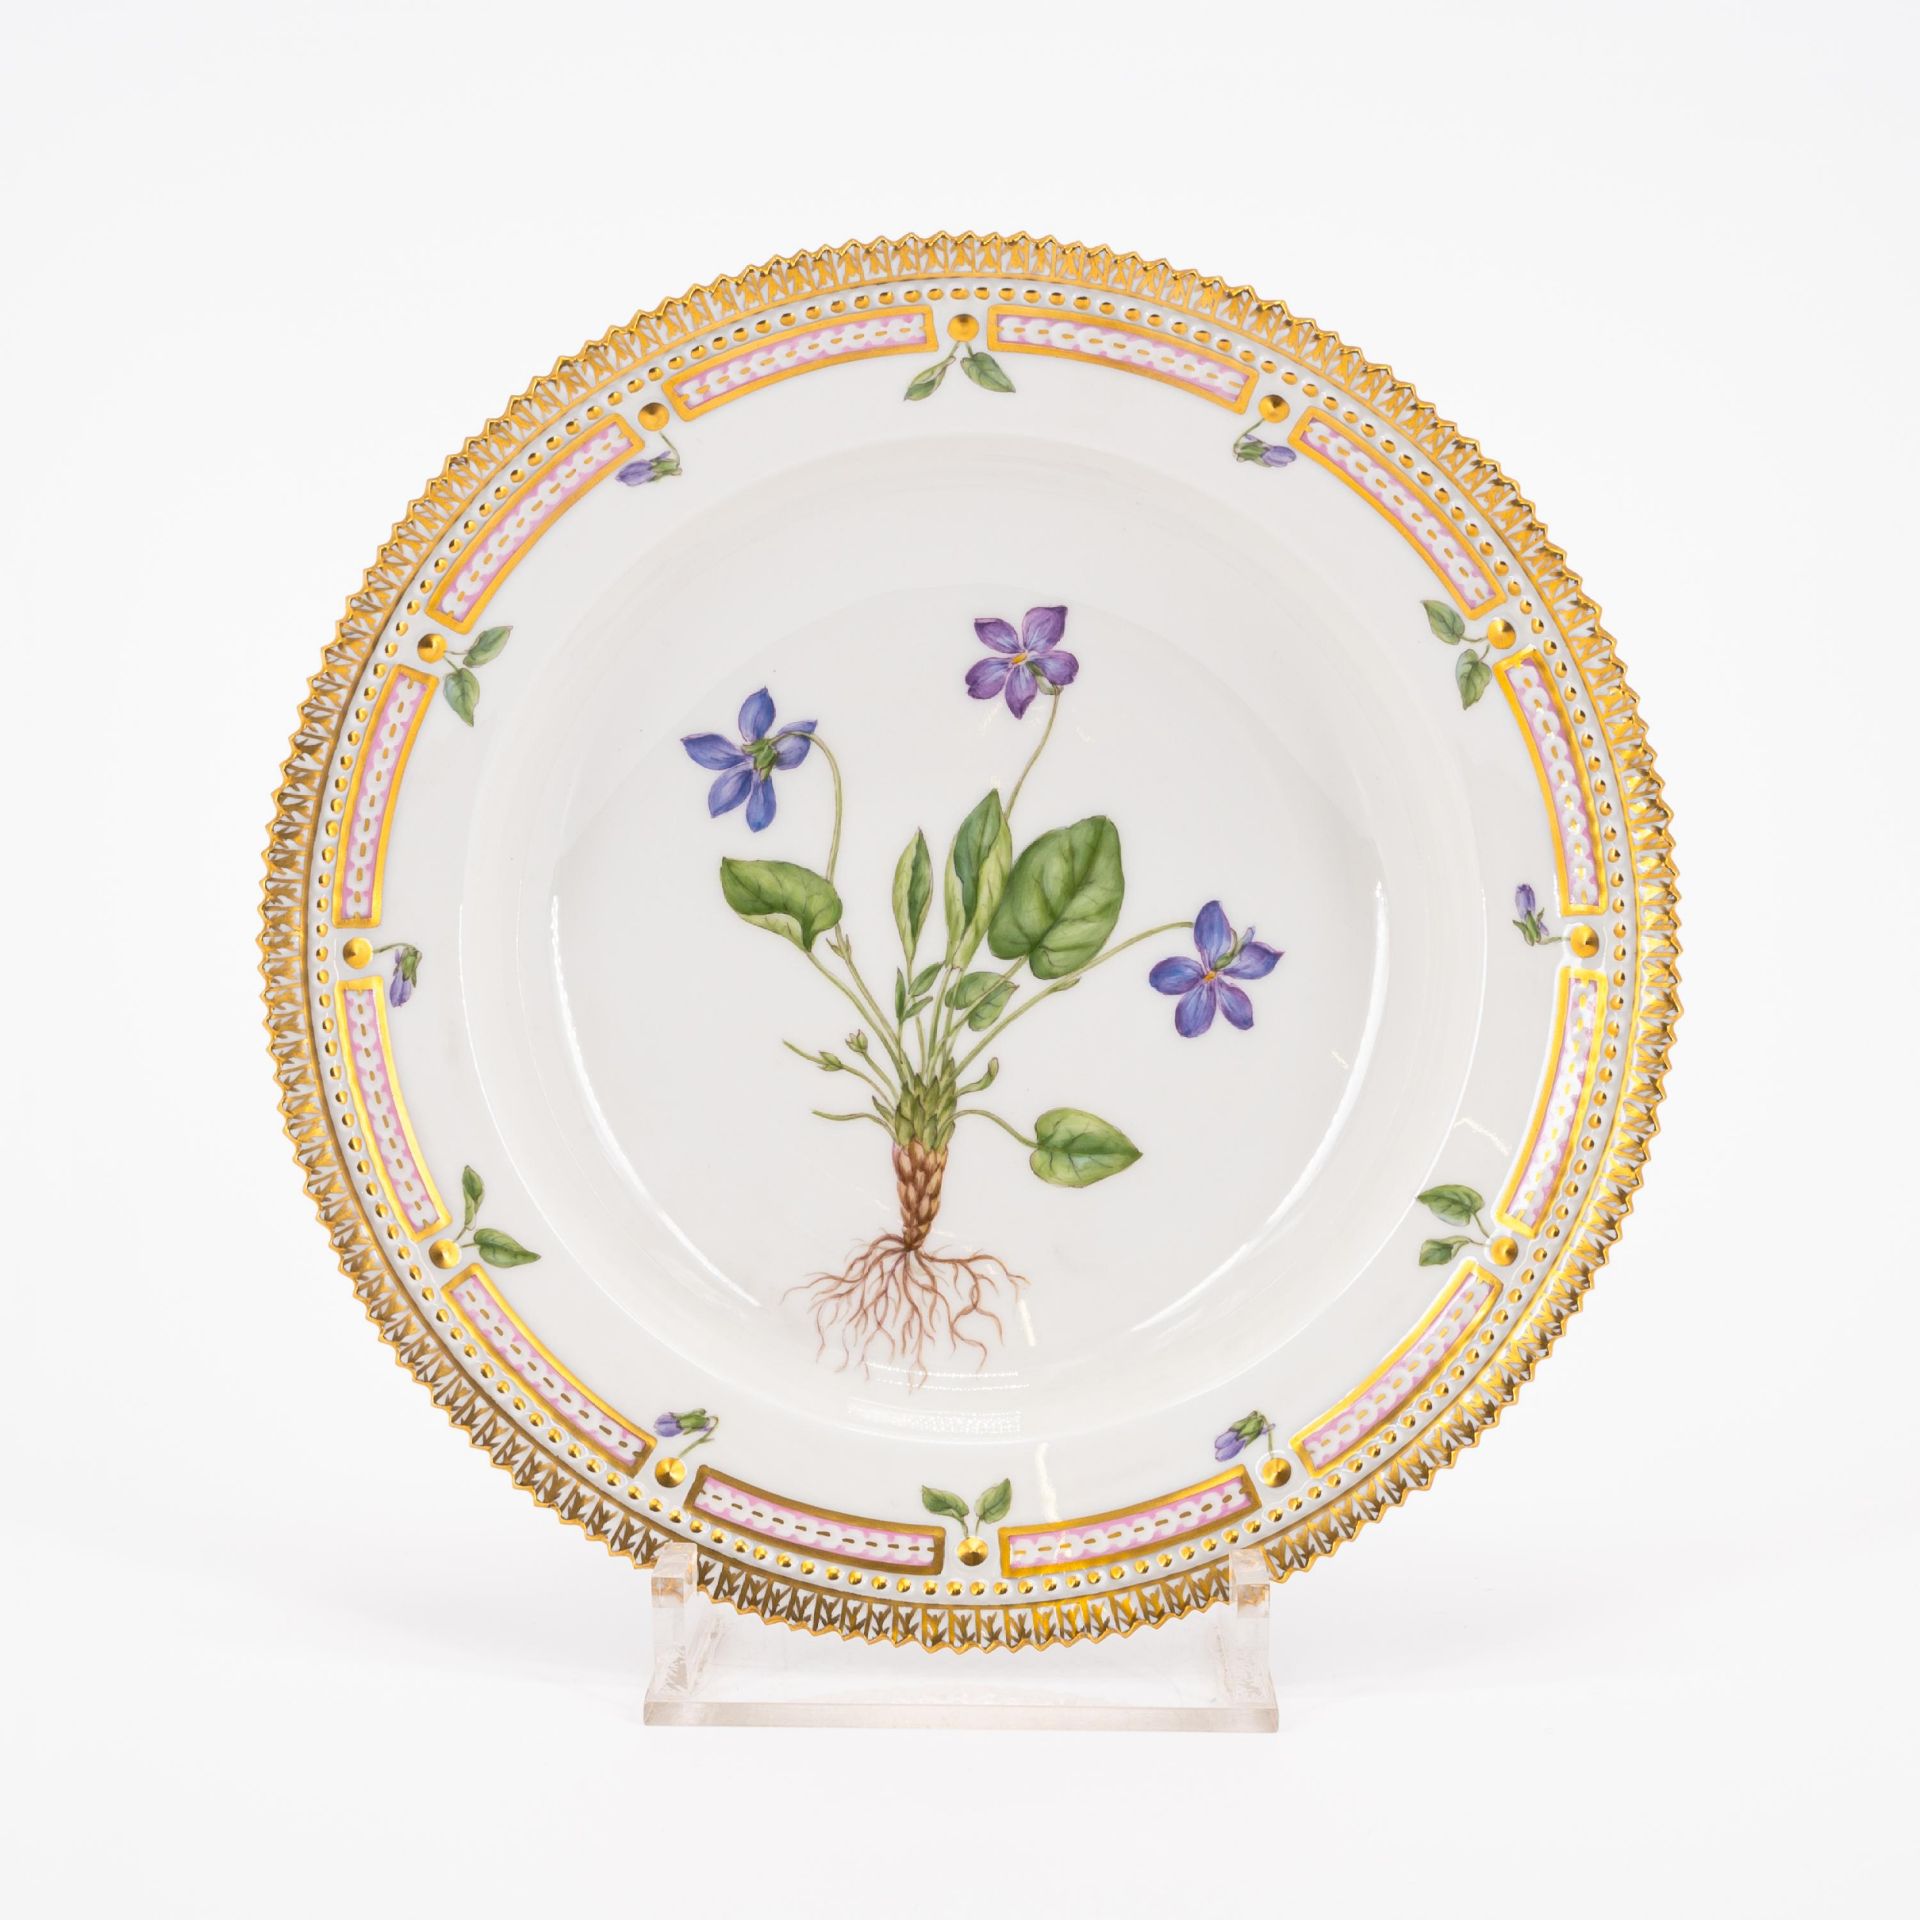 18 PIECES FROM A PORCELAIN DINNER SERVICE 'FLORA DANICA' - Image 3 of 26